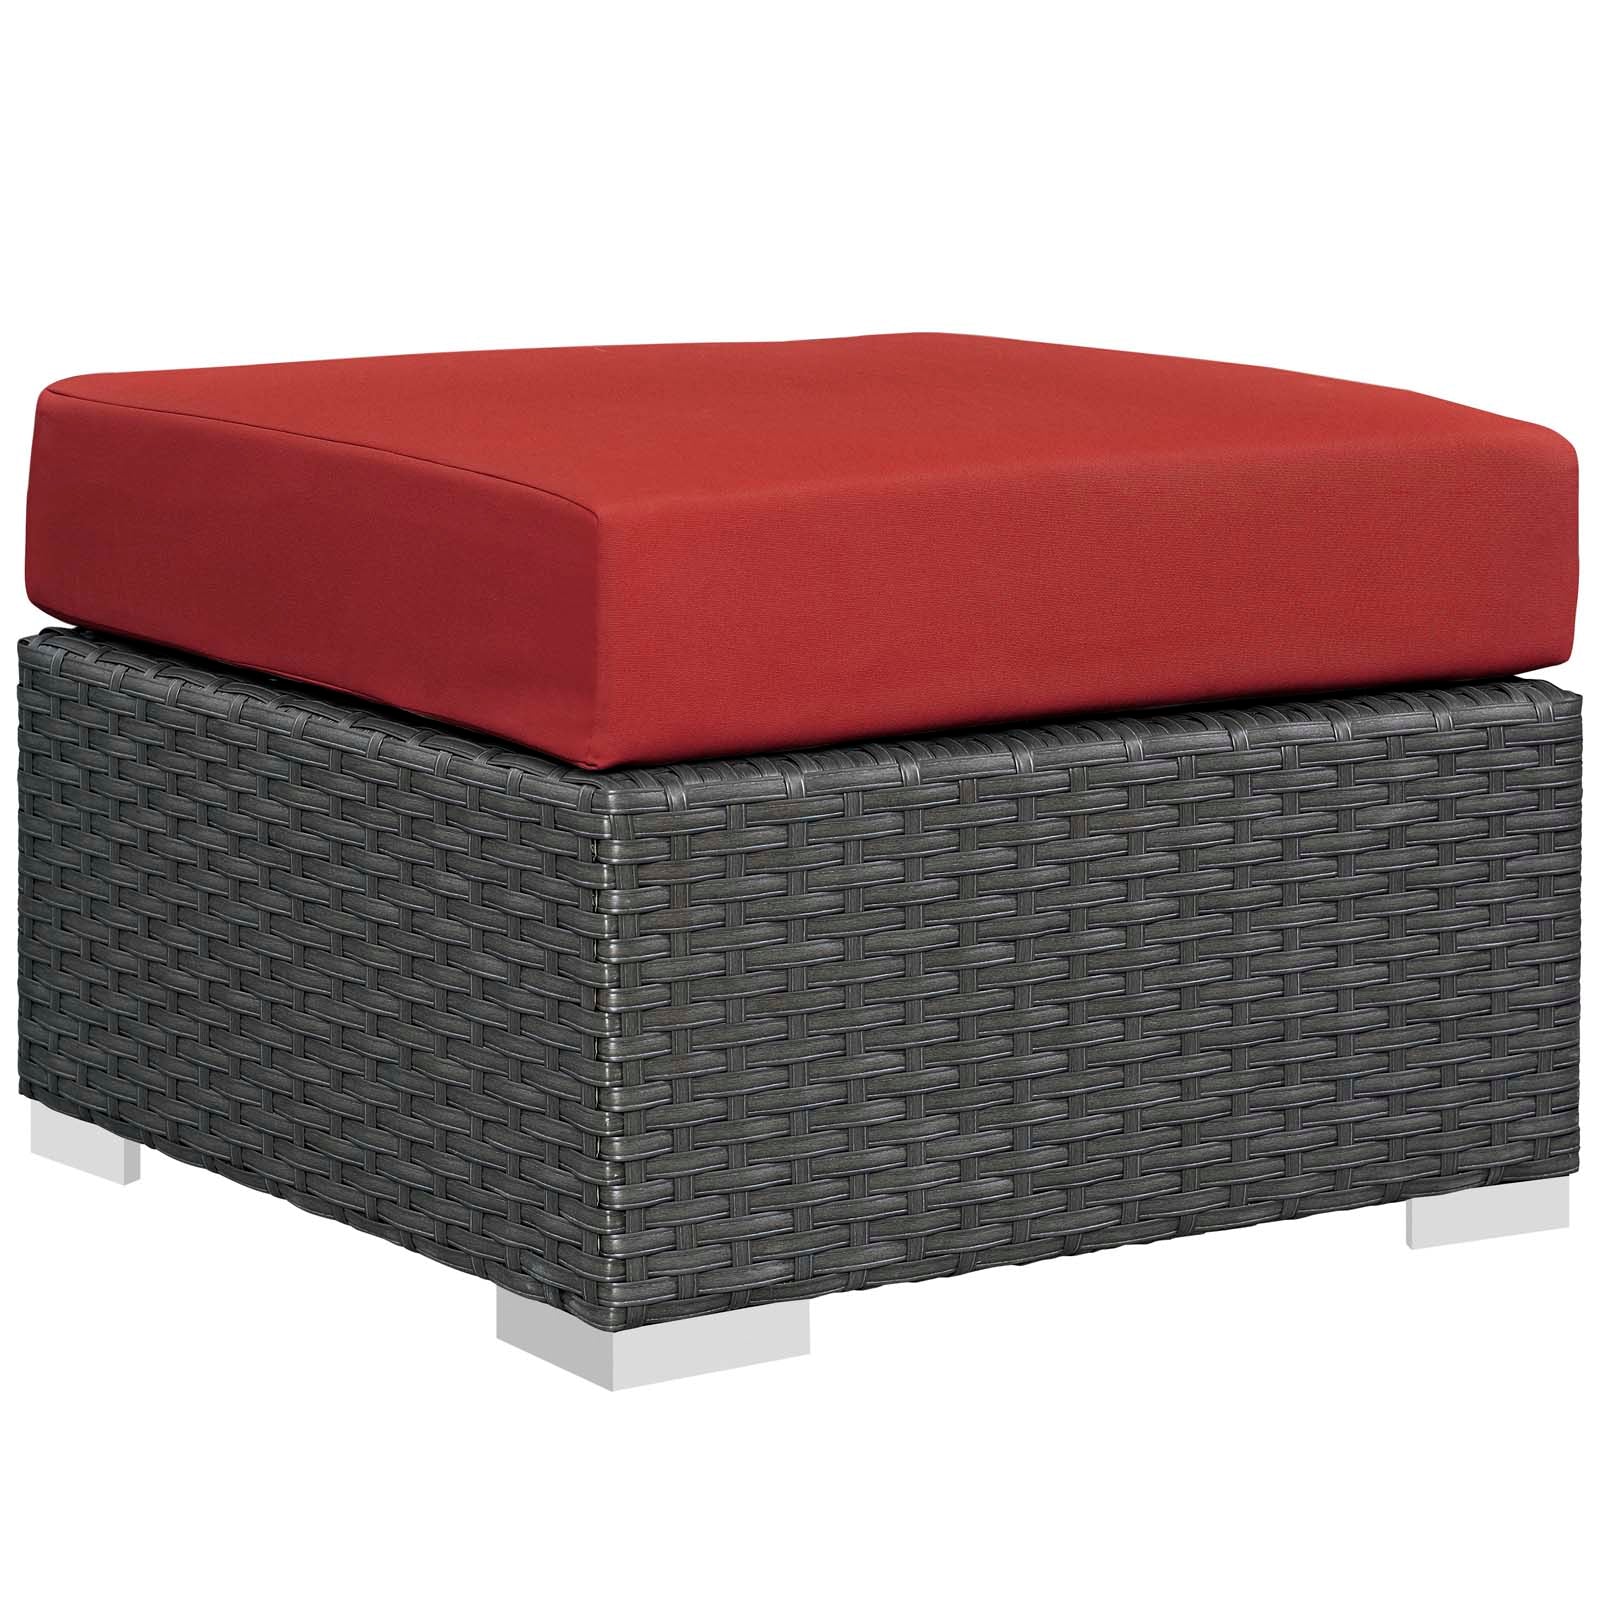 Modway Outdoor Stools & Benches - Sojourn Outdoor Patio Sunbrella Ottoman Canvas Red